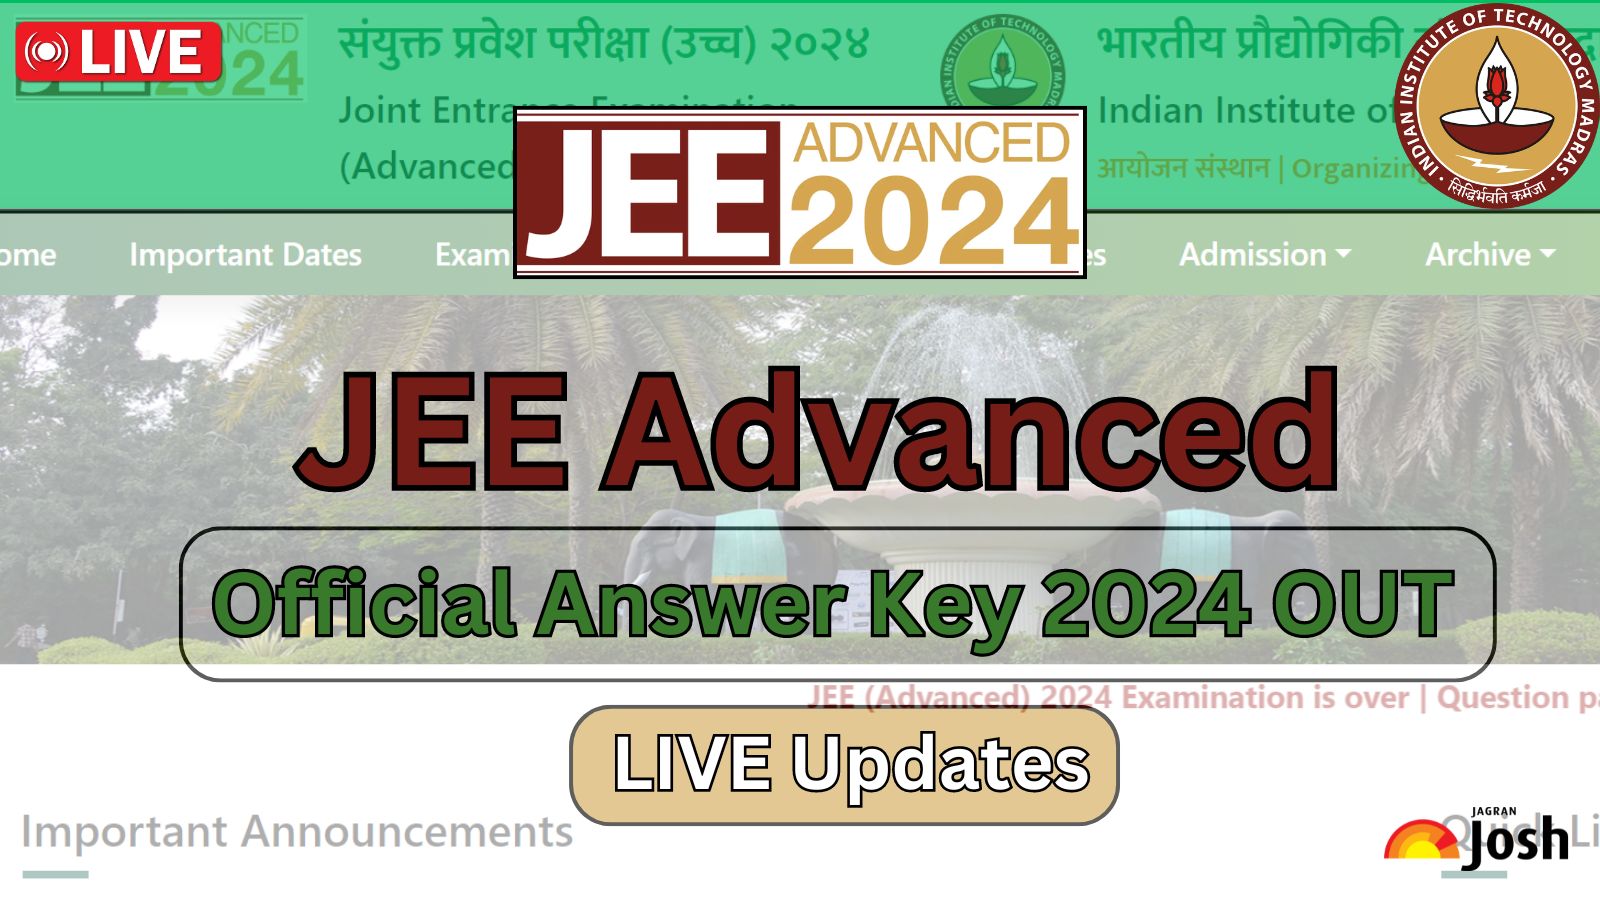  jeeadv.ac.in JEE Advanced Answer Key 2024 Released: Official Website Link to Download IIT Madras JEE Paper 1 and 2 Answer Key PDF, Check Here